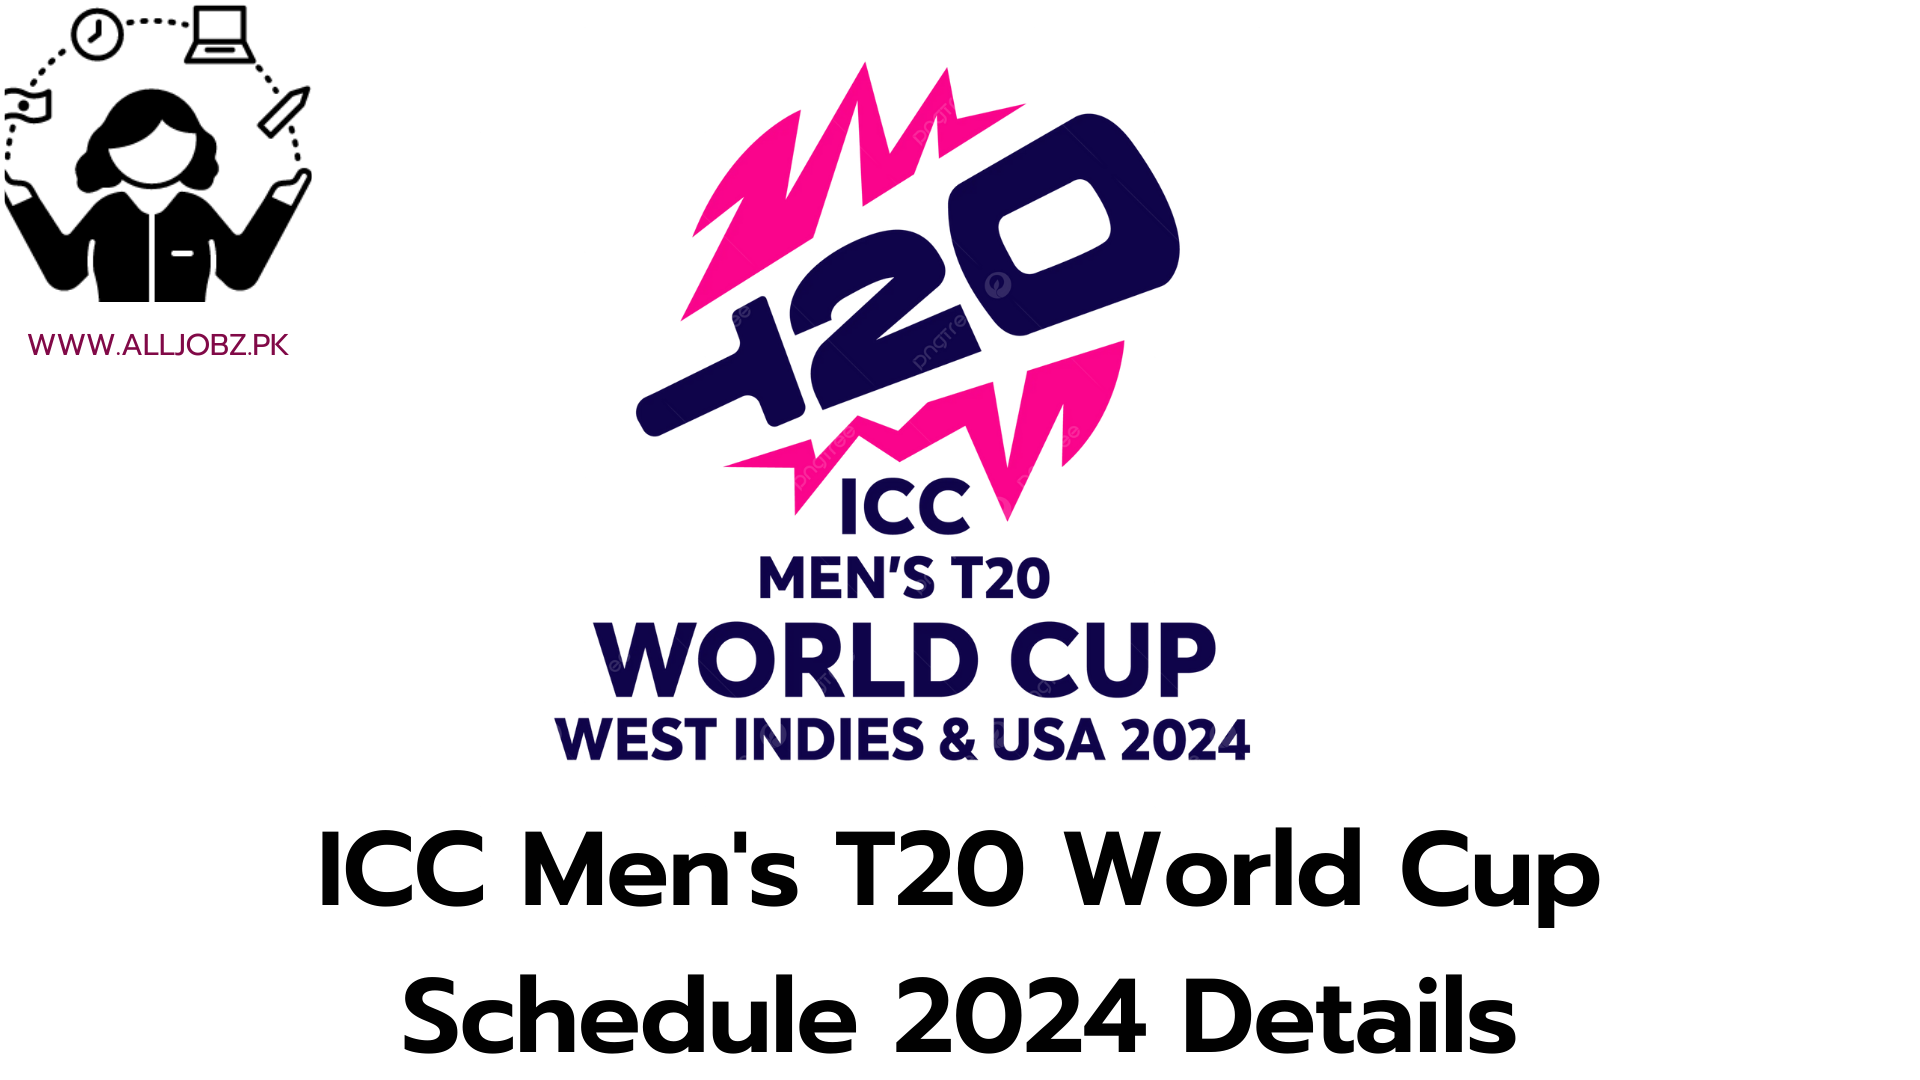 Icc Men'S T20 World Cup Schedule 2024 Details, T20 World Cup 2024 Schedule Cricbuzz, Icc Men'S T20 World Cup Schedule 2024 Venue, Icc Men'S T20 World Cup Schedule 2024 Time, T20 World Cup Match 2024, T20 World Cup 2024 Squad, T20 World Cup 2024 Date, Icc Men'S T20 World Cup Schedule 2024 Pakistan, T20 World Cup 2024 Group